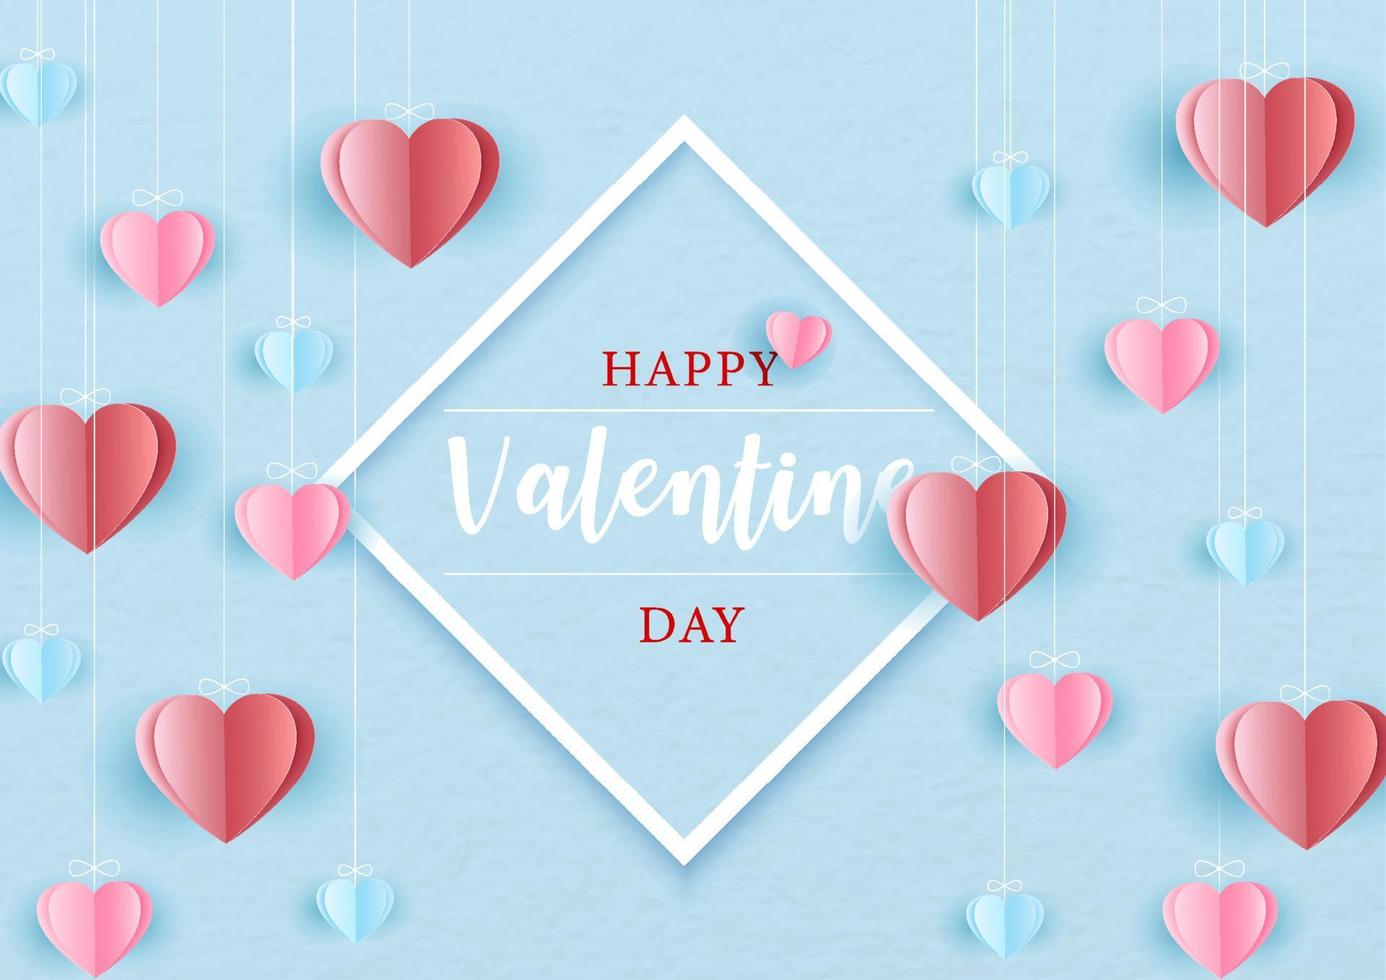 Happy Valentine day's wording in white frame with red, pink and blue harts hang on blue paper pattern background. Valentine greeting card in paper cut style and vector design.